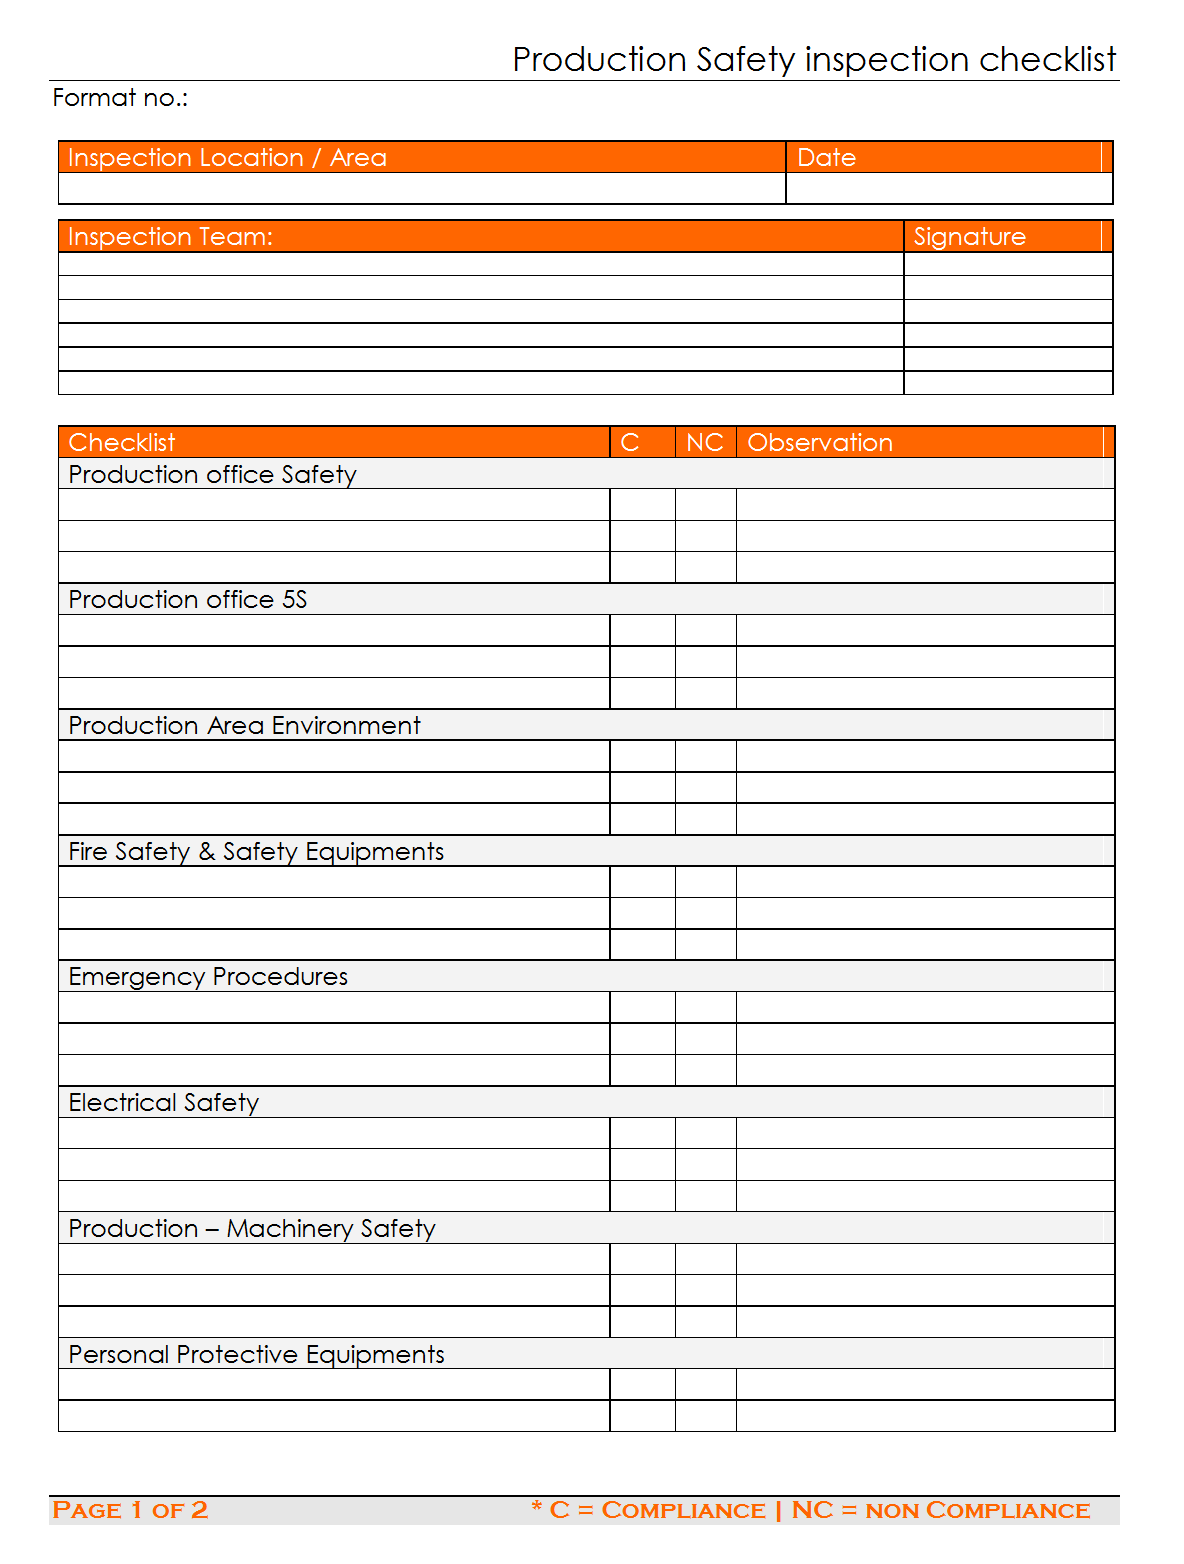 Production safety inspection checklist template Throughout Office Safety Checklist Template In Office Safety Checklist Template